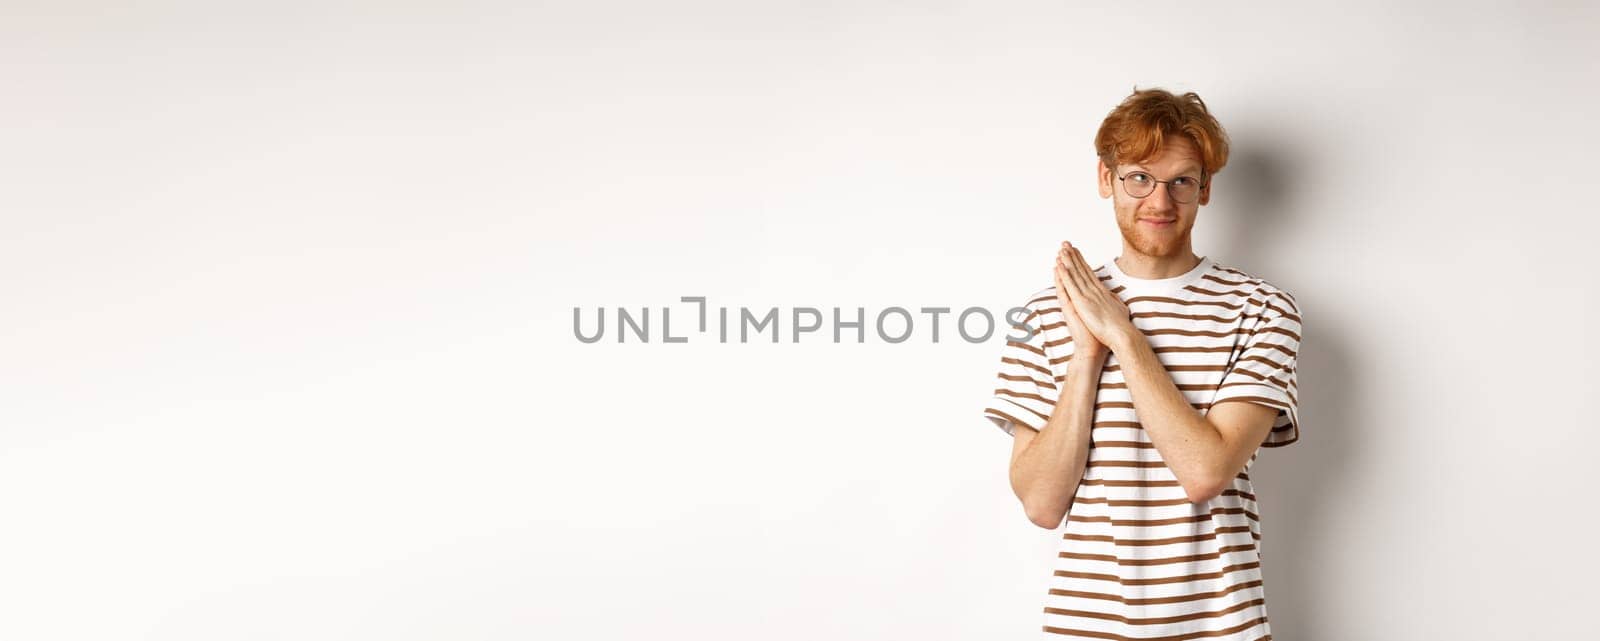 Thoughtful man with red hair rubbing hands and looking at upper right corner, having an idea, standing over white background.